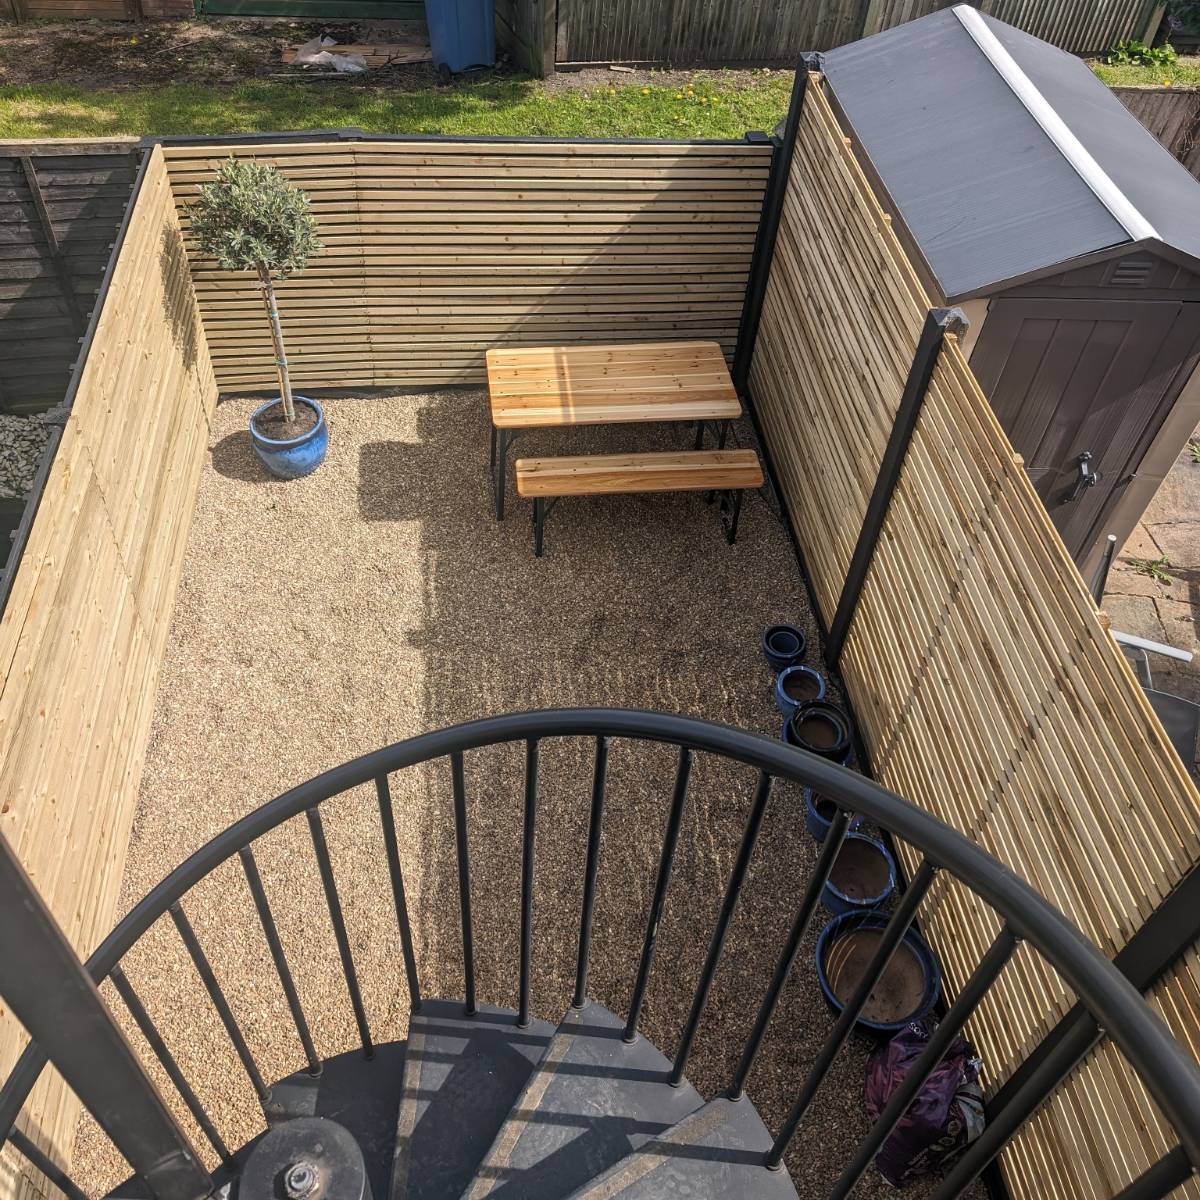 48 hour garden makeover at my son's in South London. Dad fence-building skills 🙂